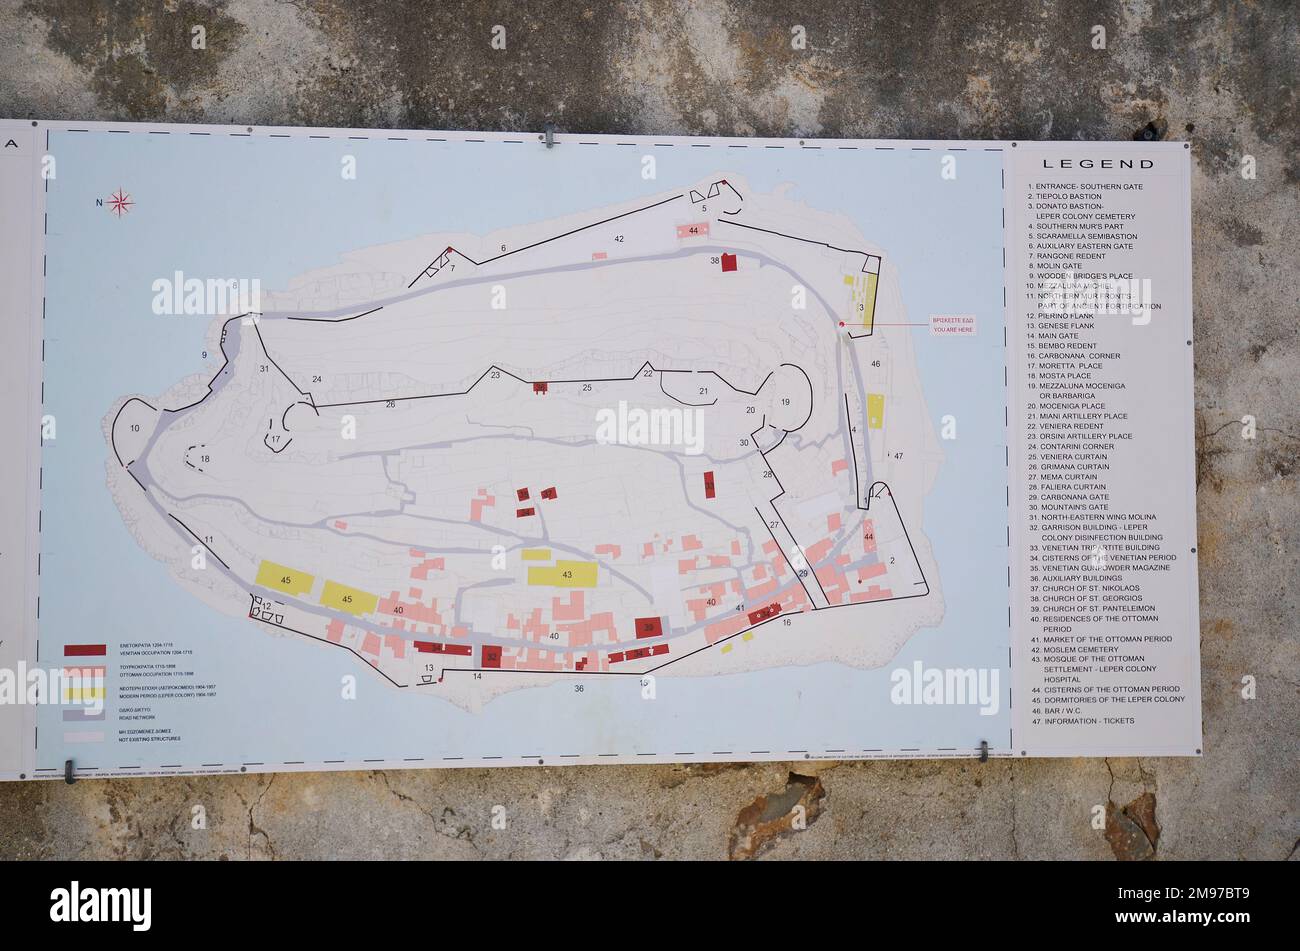 Spinalonga, Crete, Greece - October 10, 2022: Map and legend of the old Venetian Fortress Spinalonga, until 1957 used as a leper station, now a popula Stock Photo